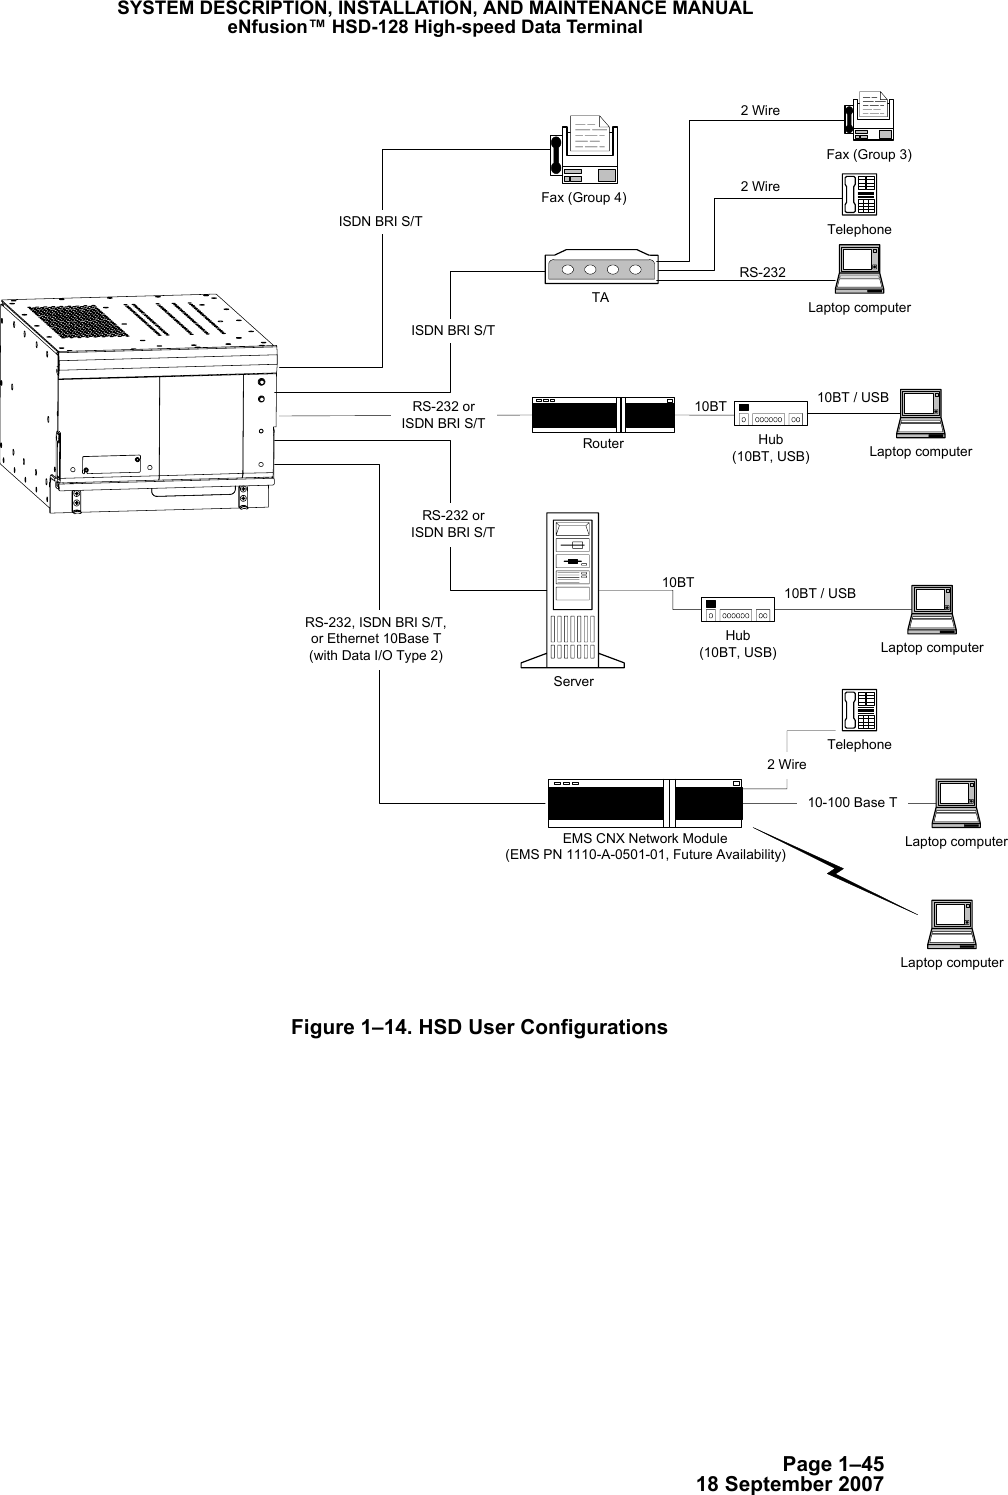 Page 1–4518 September 2007SYSTEM DESCRIPTION, INSTALLATION, AND MAINTENANCE MANUALeNfusion™ HSD-128 High-speed Data TerminalFigure 1–14. HSD User ConfigurationsHub(10BT, USB) 10BT 10BT / USBServerFax (Group 4)Telephone2 WireLaptop computerTARS-232Laptop computerEMS CNX Network Module(EMS PN 1110-A-0501-01, Future Availability)10BTLaptop computerHub(10BT, USB)10BT / USBRouterISDN BRI S/TISDN BRI S/TRS-232, ISDN BRI S/T,or Ethernet 10Base T(with Data I/O Type 2)RS-232 orISDN BRI S/TRS-232 orISDN BRI S/TTelephoneLaptop computerLaptop computer2 Wire10-100 Base TFax (Group 3)2 Wire